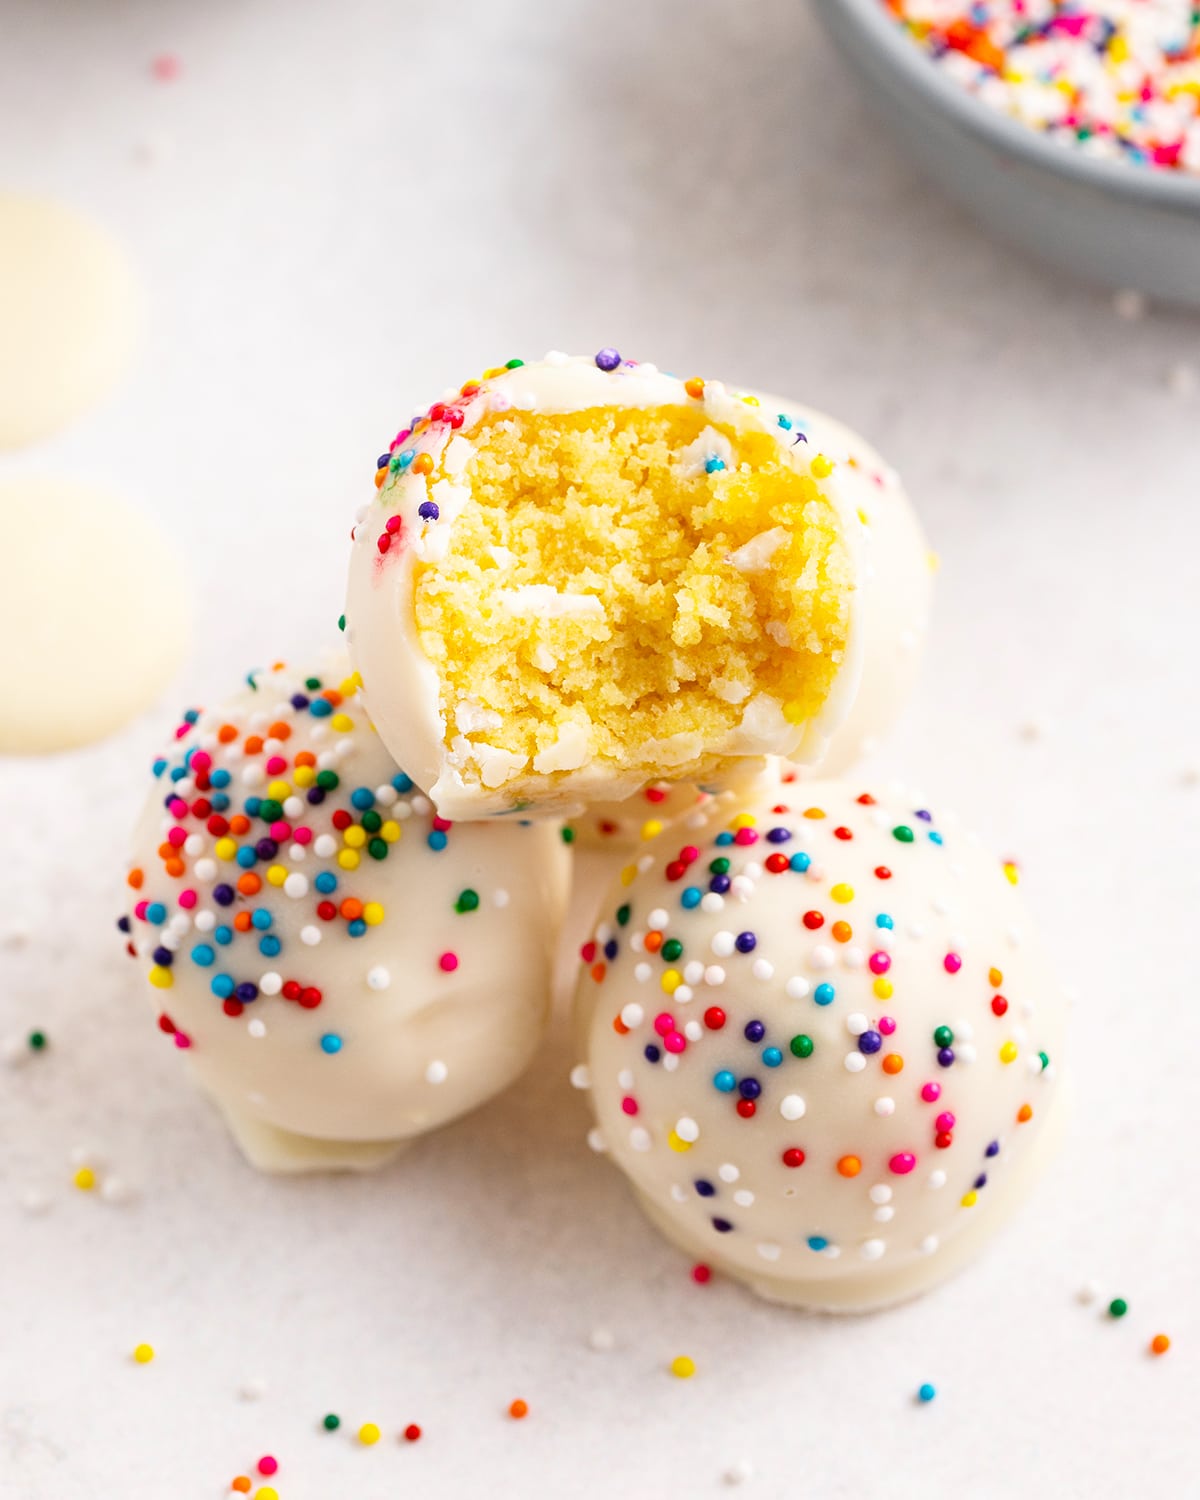 A pile of cake balls, the top ball has a bite out of it showing the yellow cake in the middle.